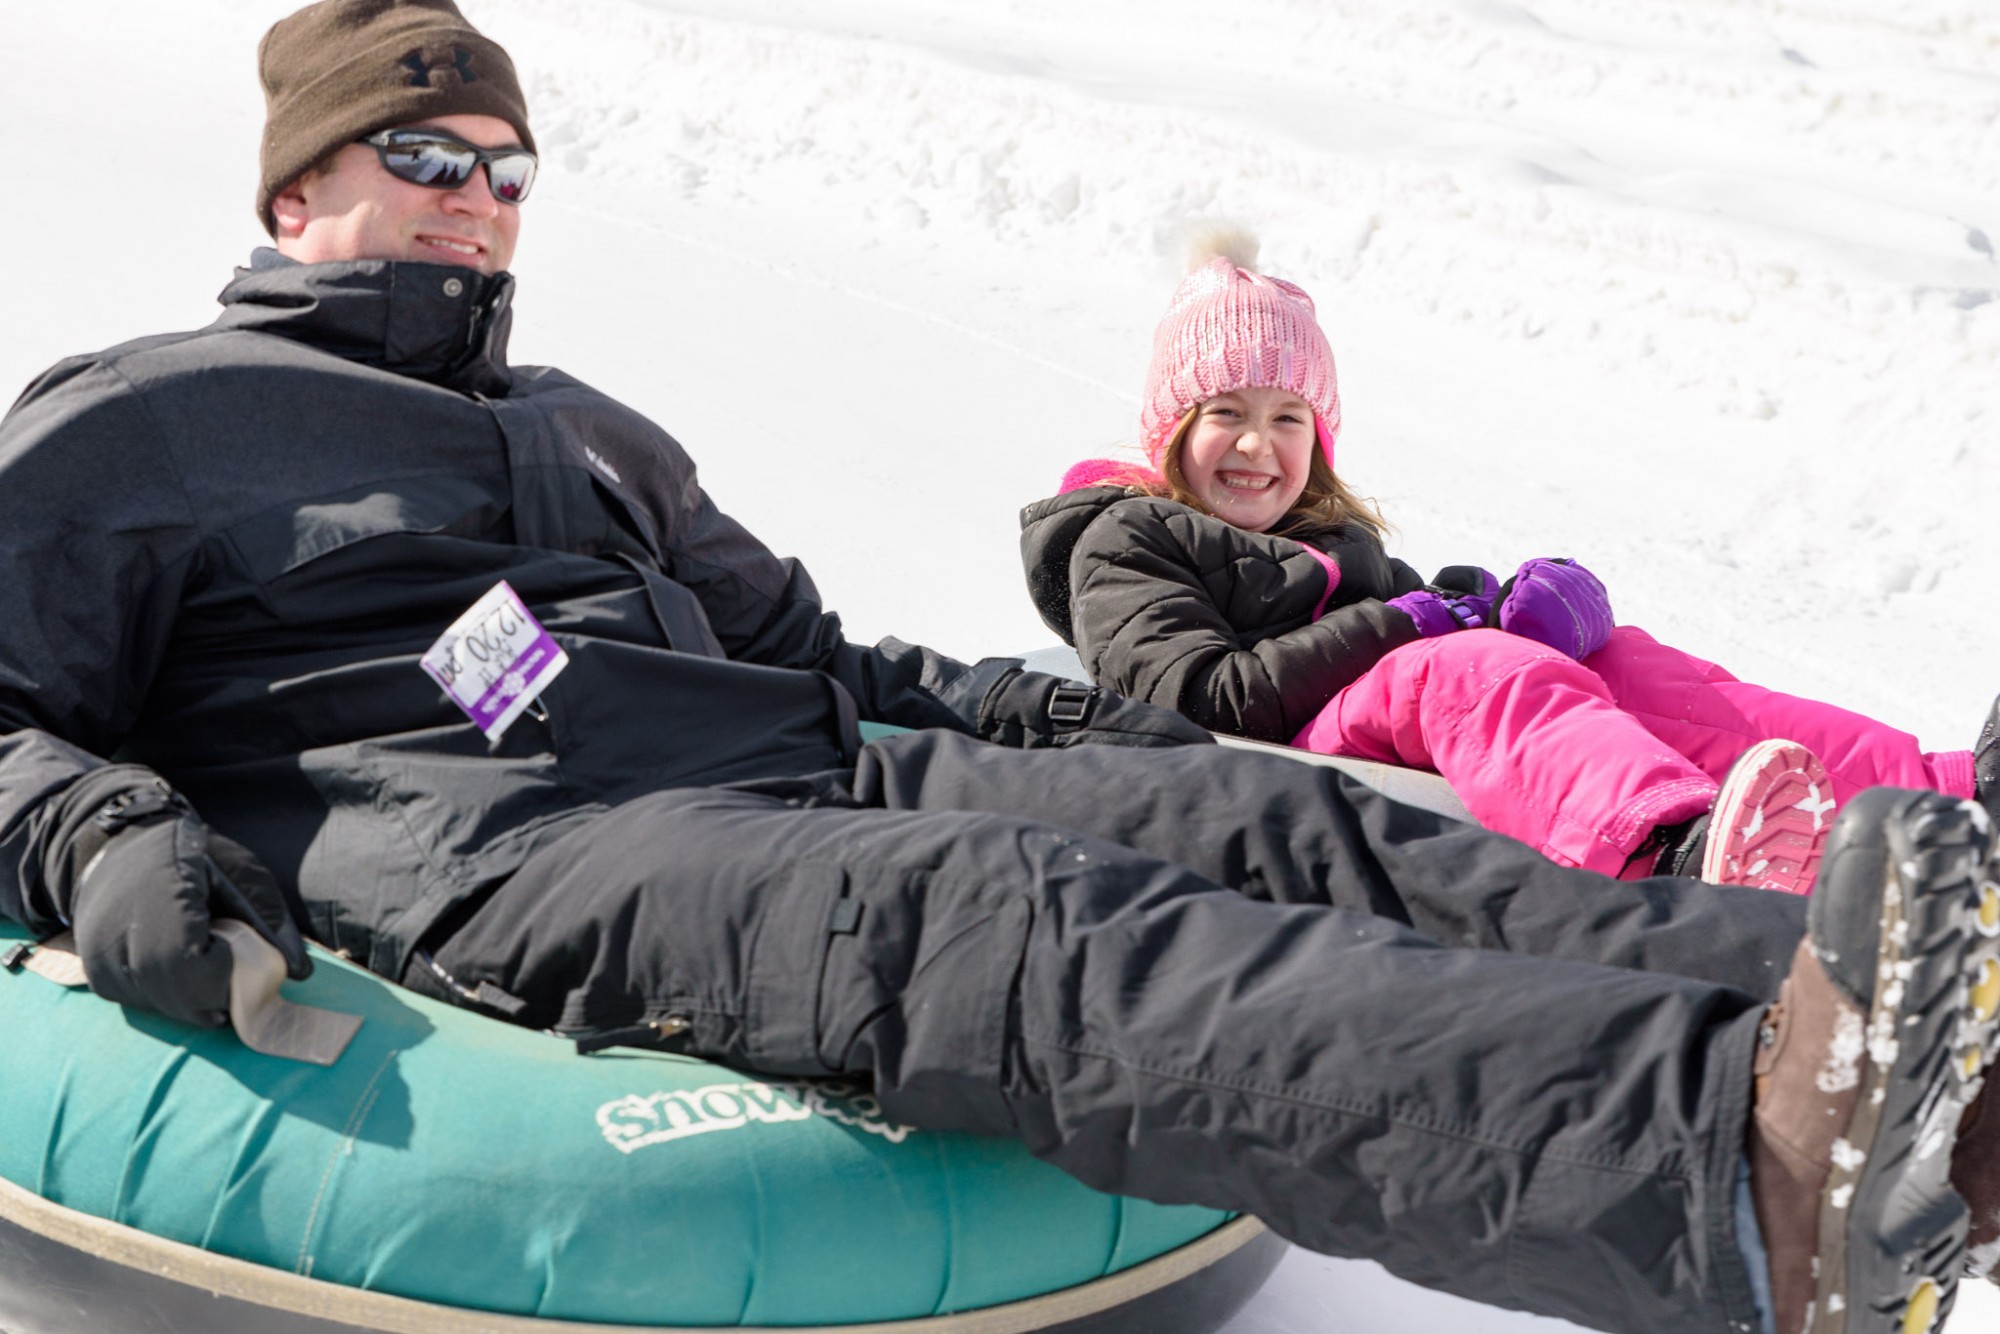 Snow Tubing is fun for all ages at Snow Trails.